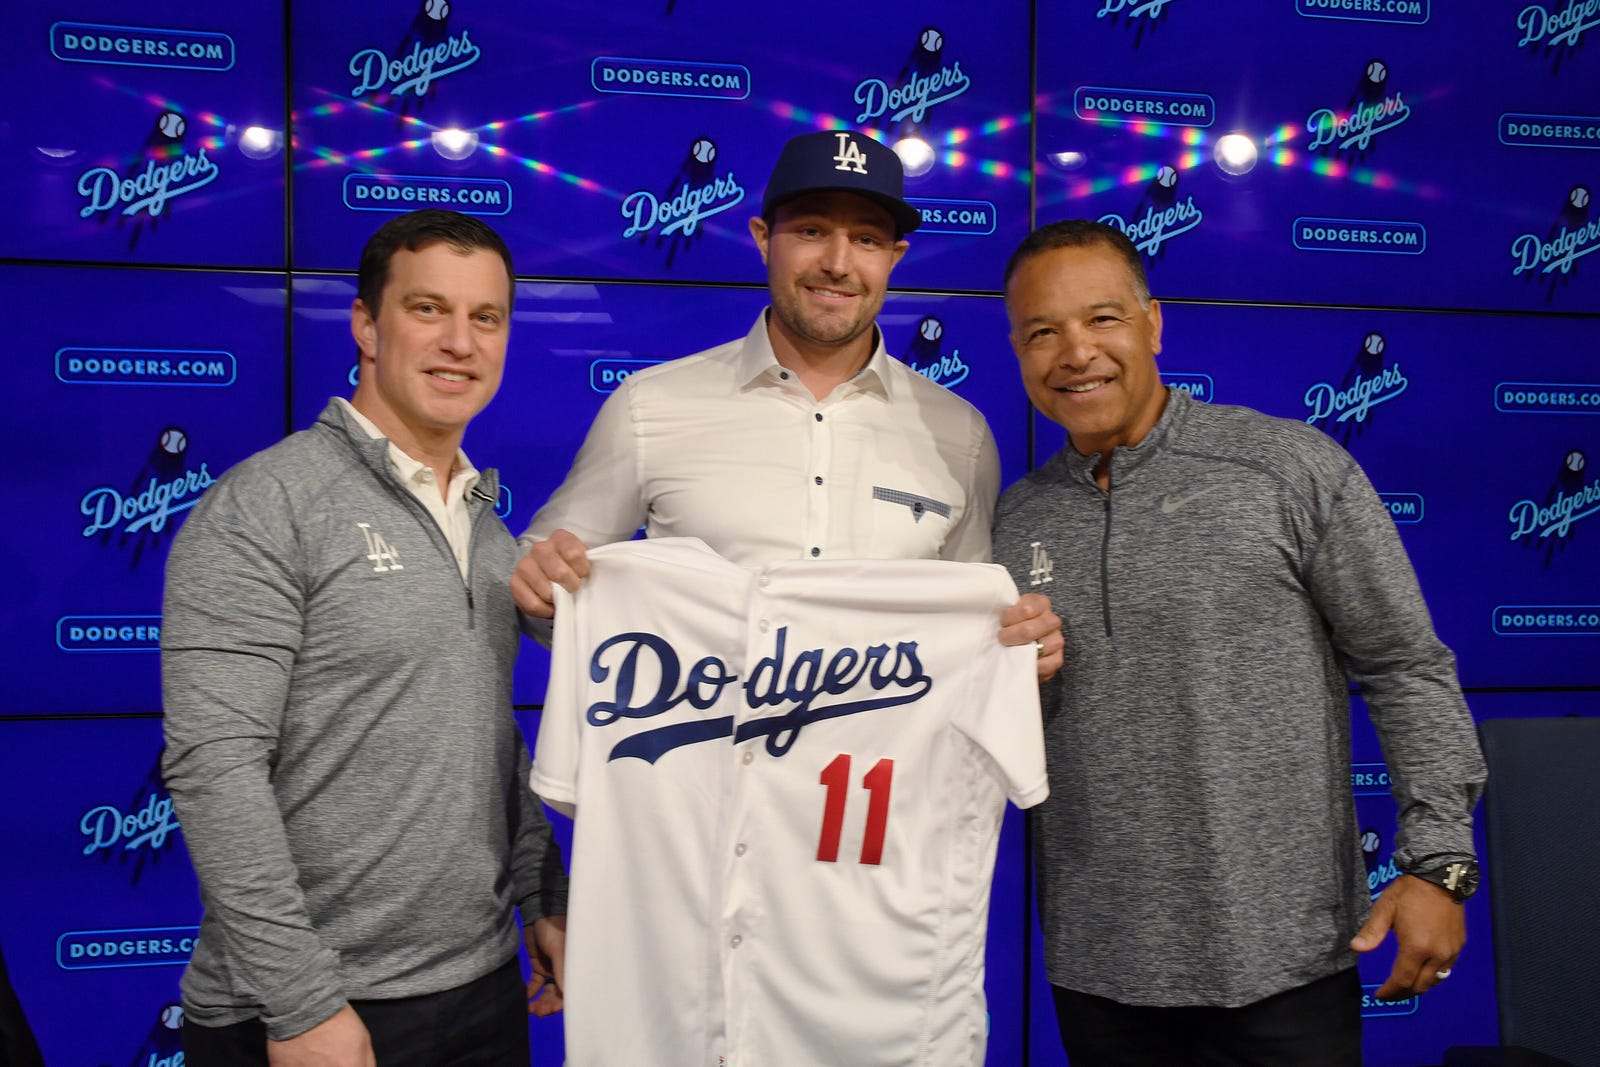 Dodgers officially announce signing of outfielder A.J. Pollock